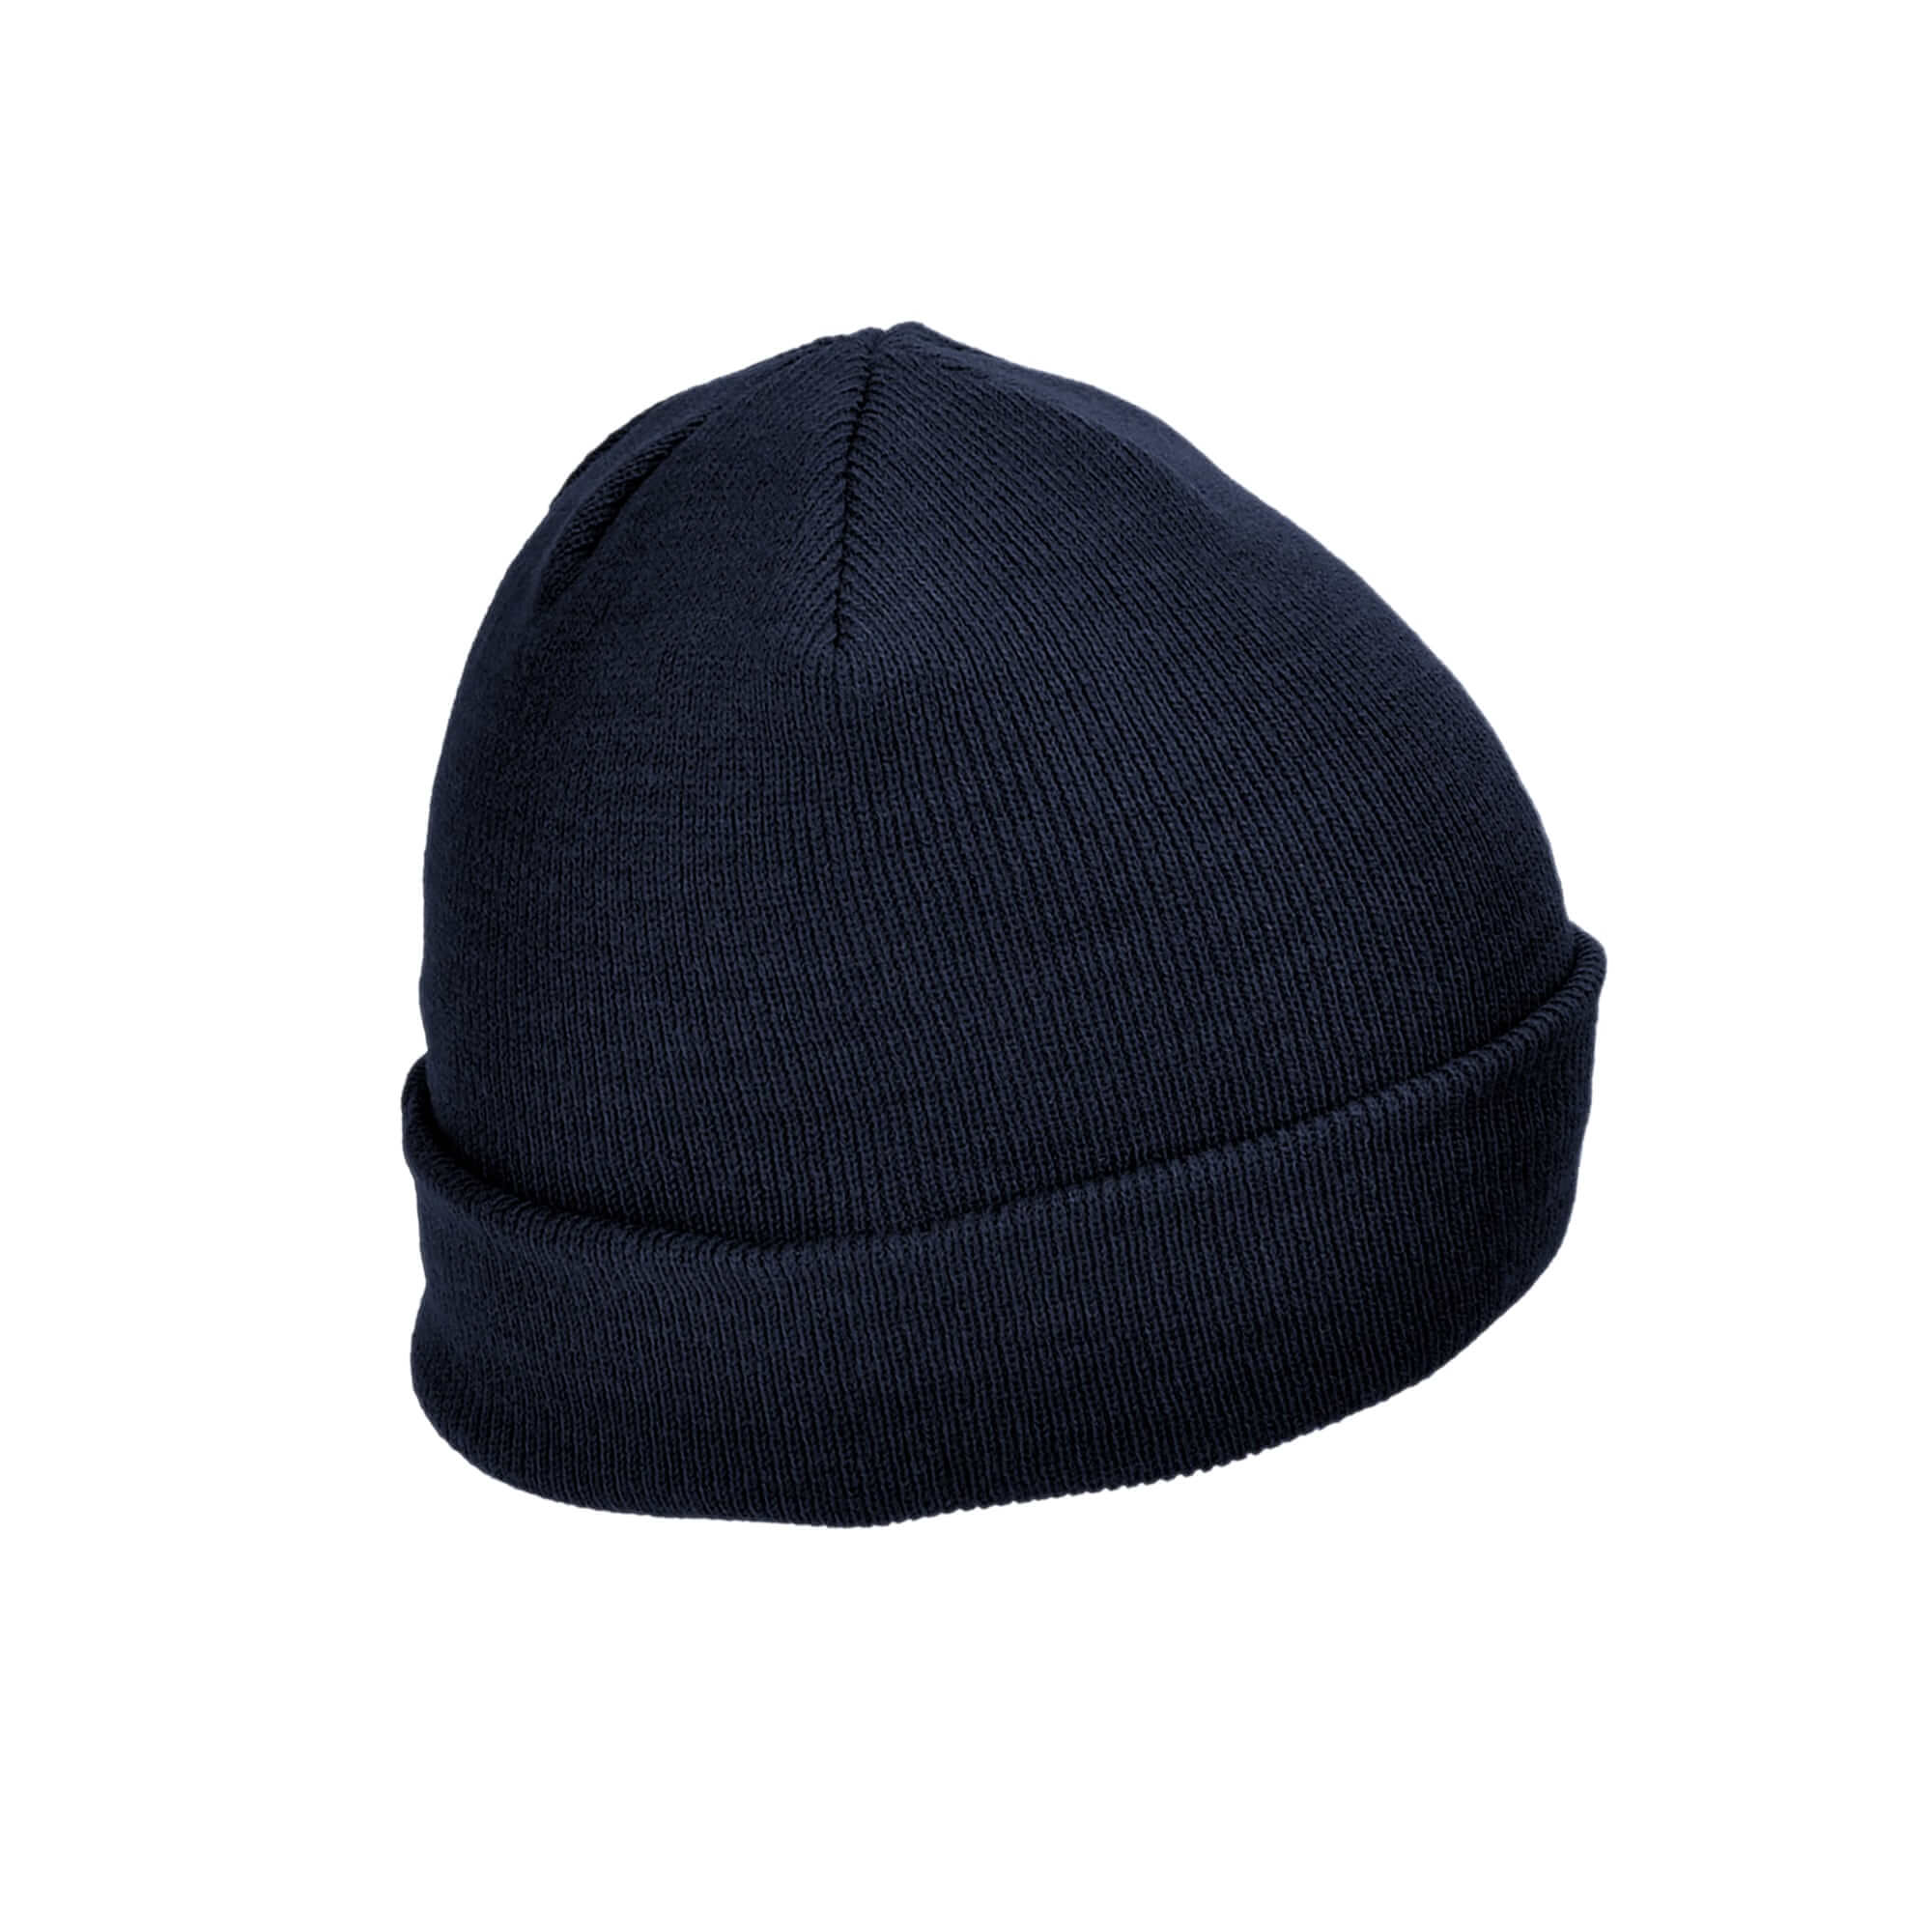 Double wool cap with fire emblem